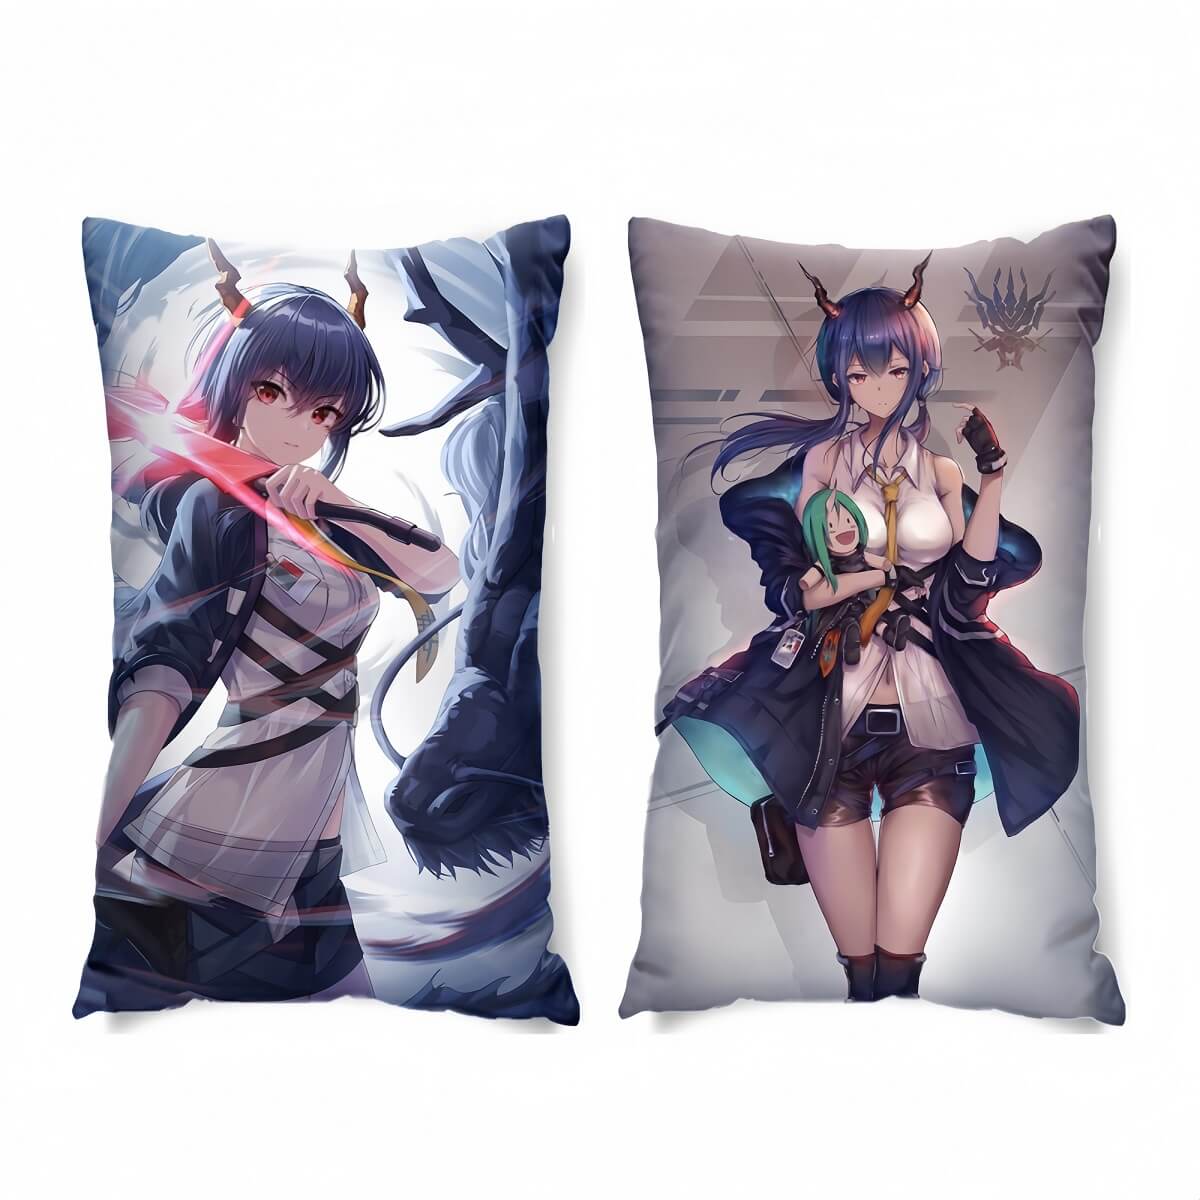 Arknights Chen  beautifully painted pillow2